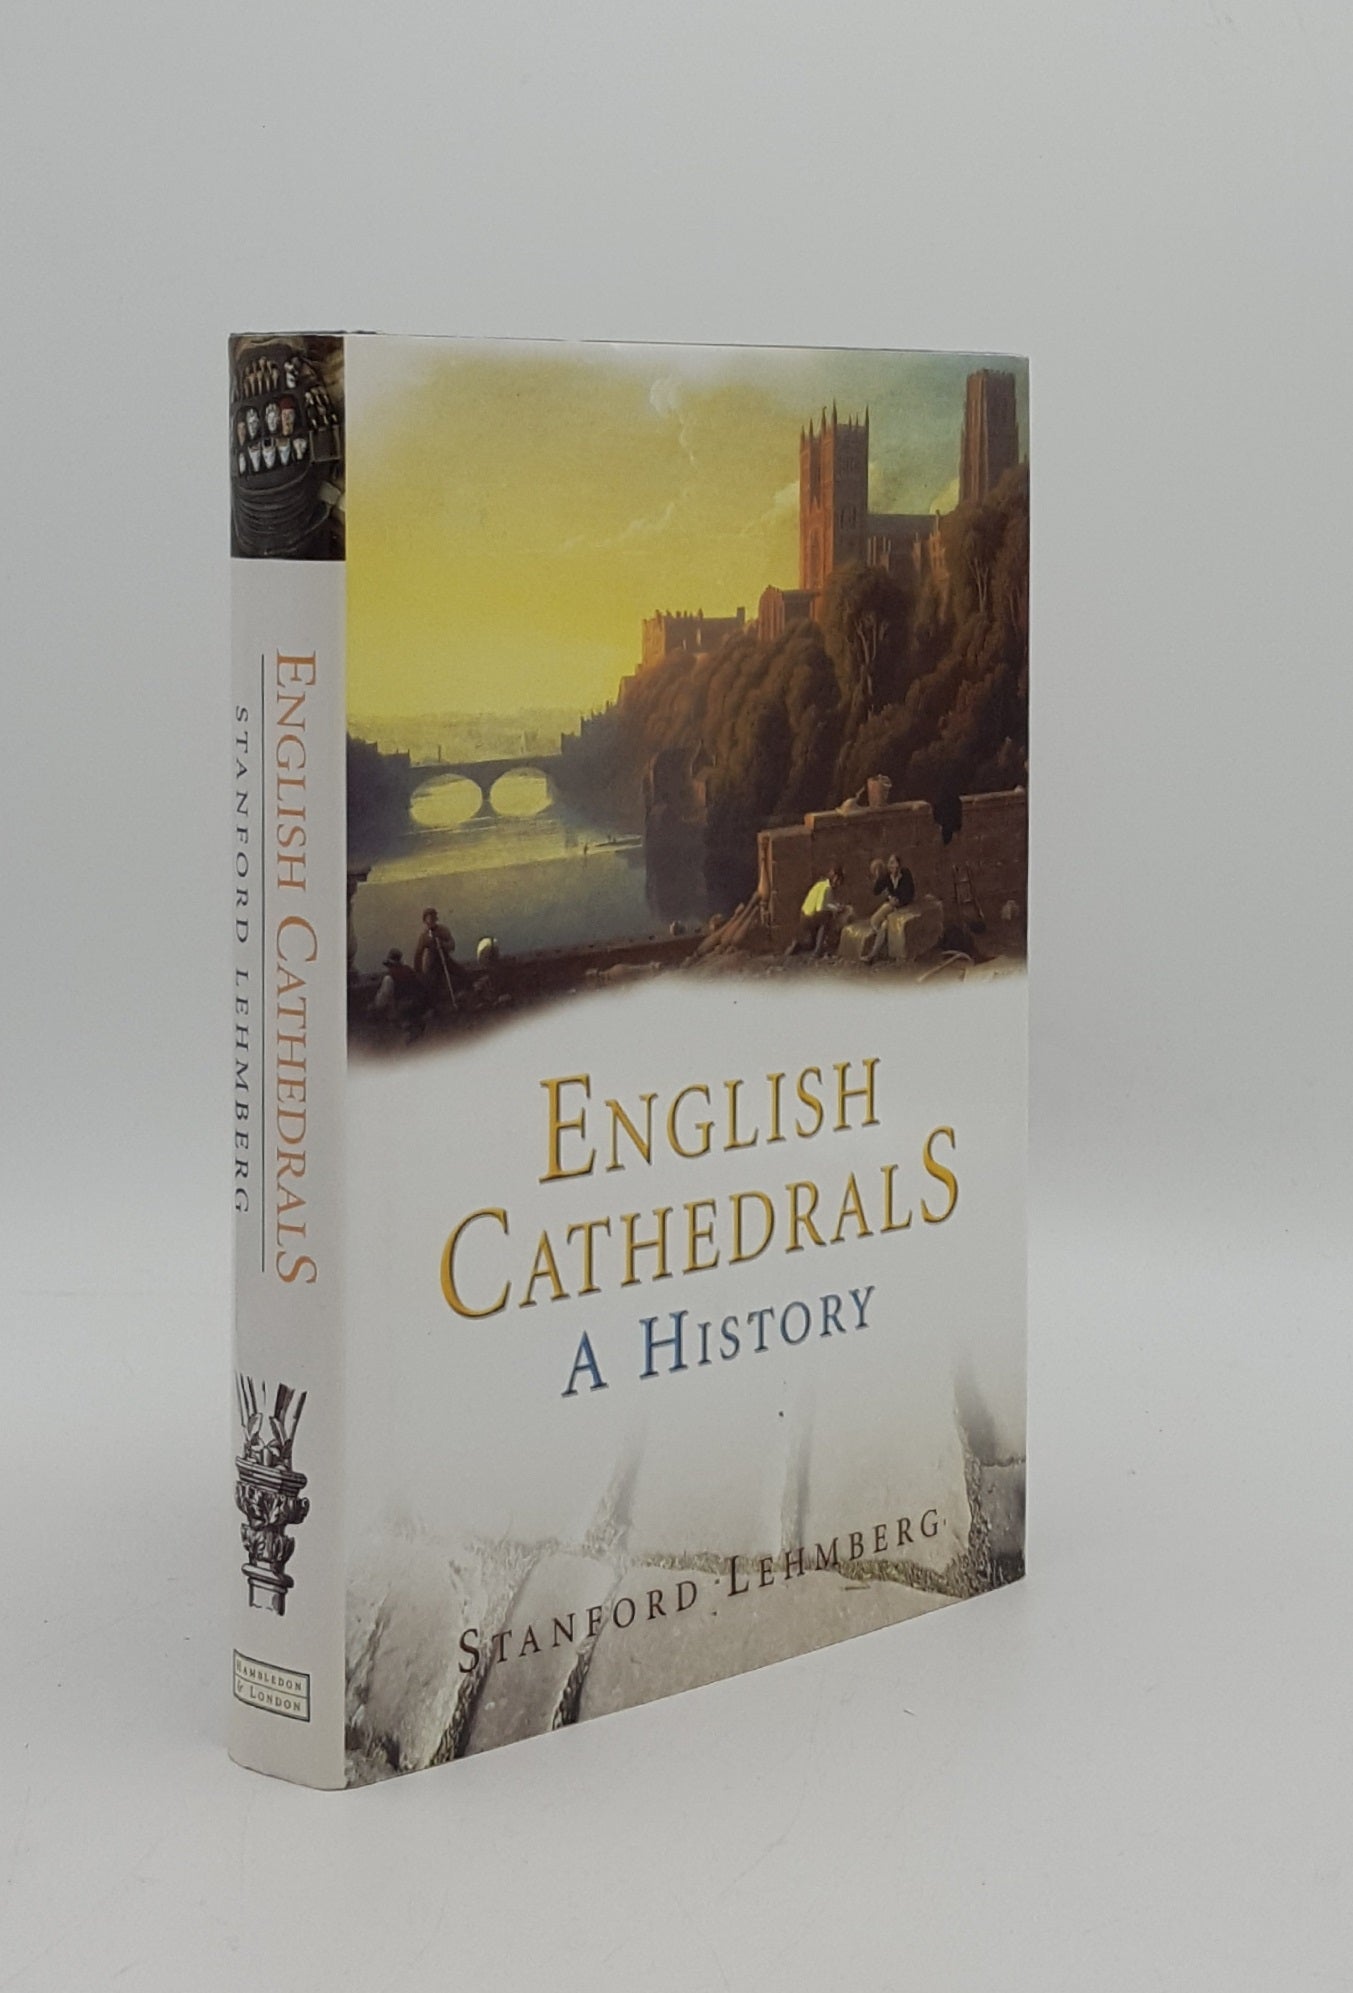 LEHMBERG Stanford - English Cathedrals a History